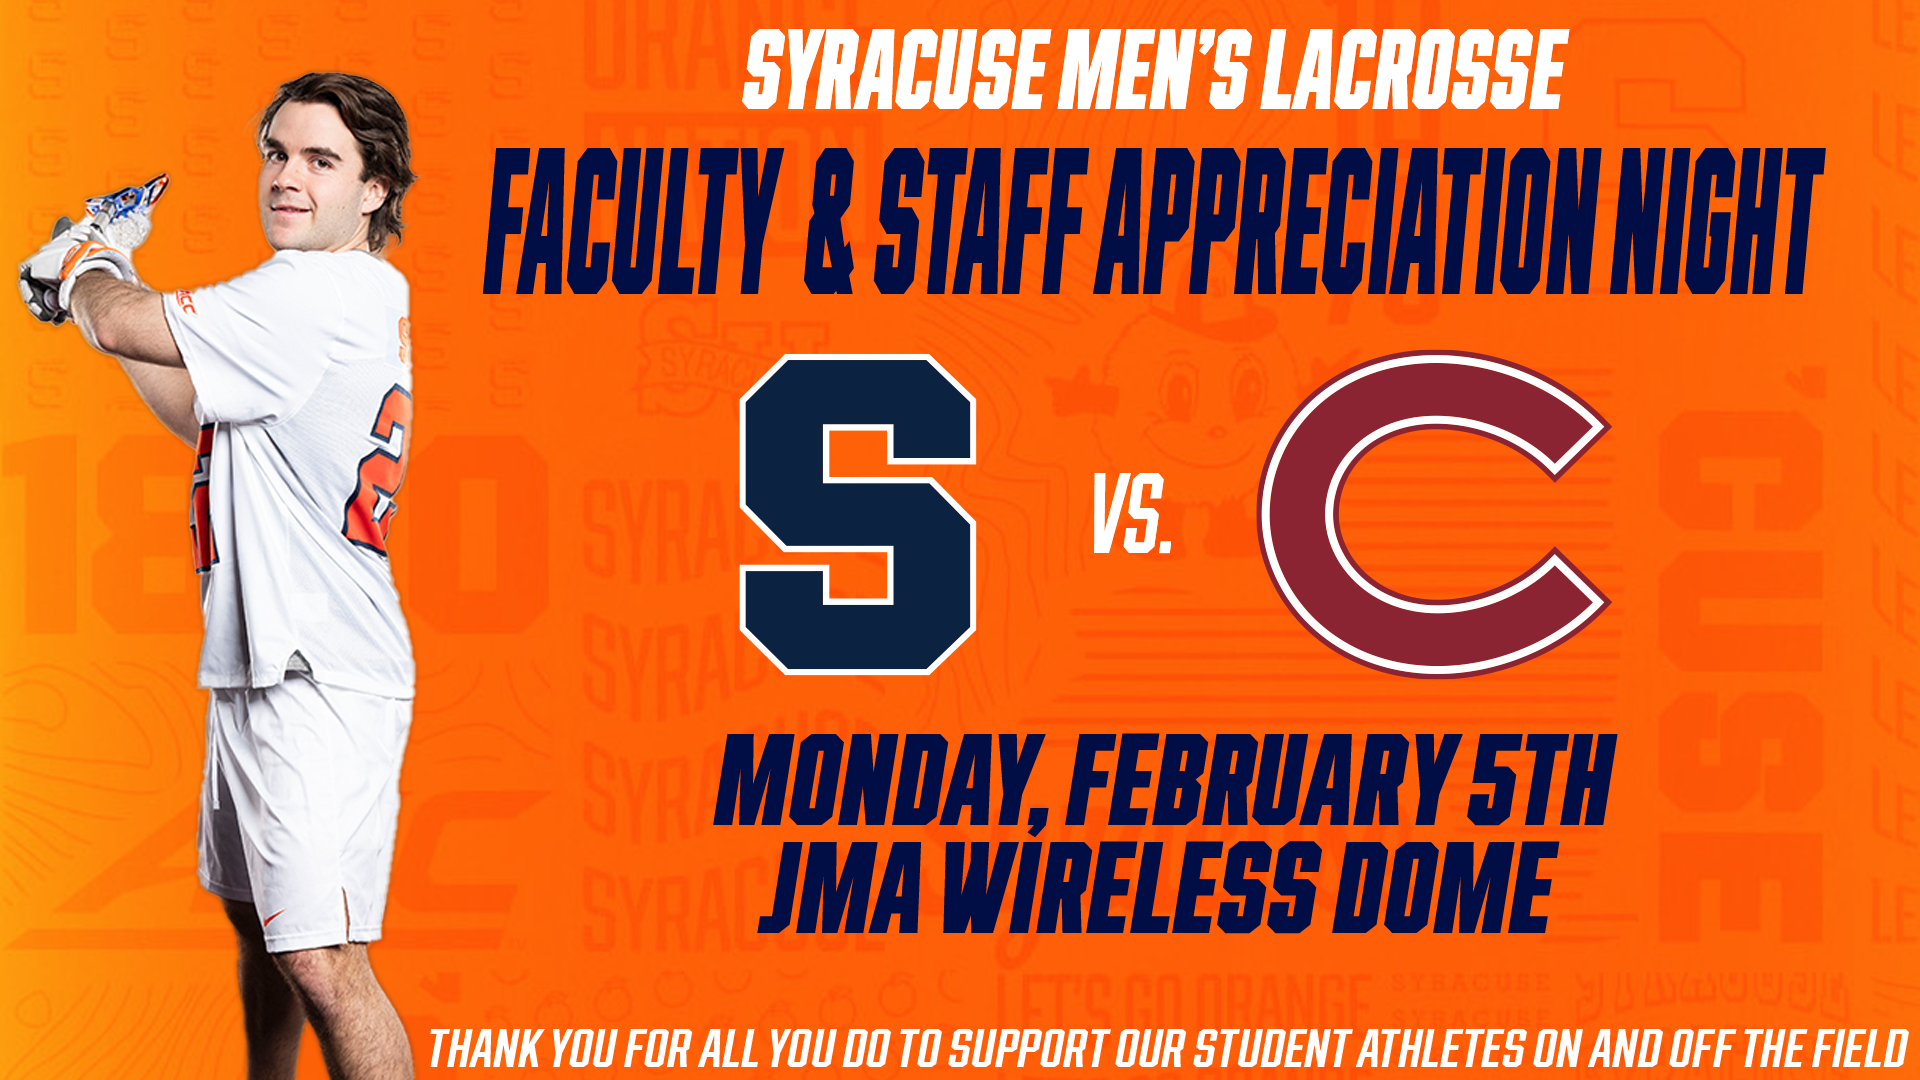 Orange graphic with a photo of a lacrosse player and the text "Syracuse Men's Lacrosse Faculty & Staff Appreciation NIght, Monday February 5th, JMA Wireless Dome, Thank you for all you to support our student athletes on and off the field" and the Syracuse Block S and Clemson logo